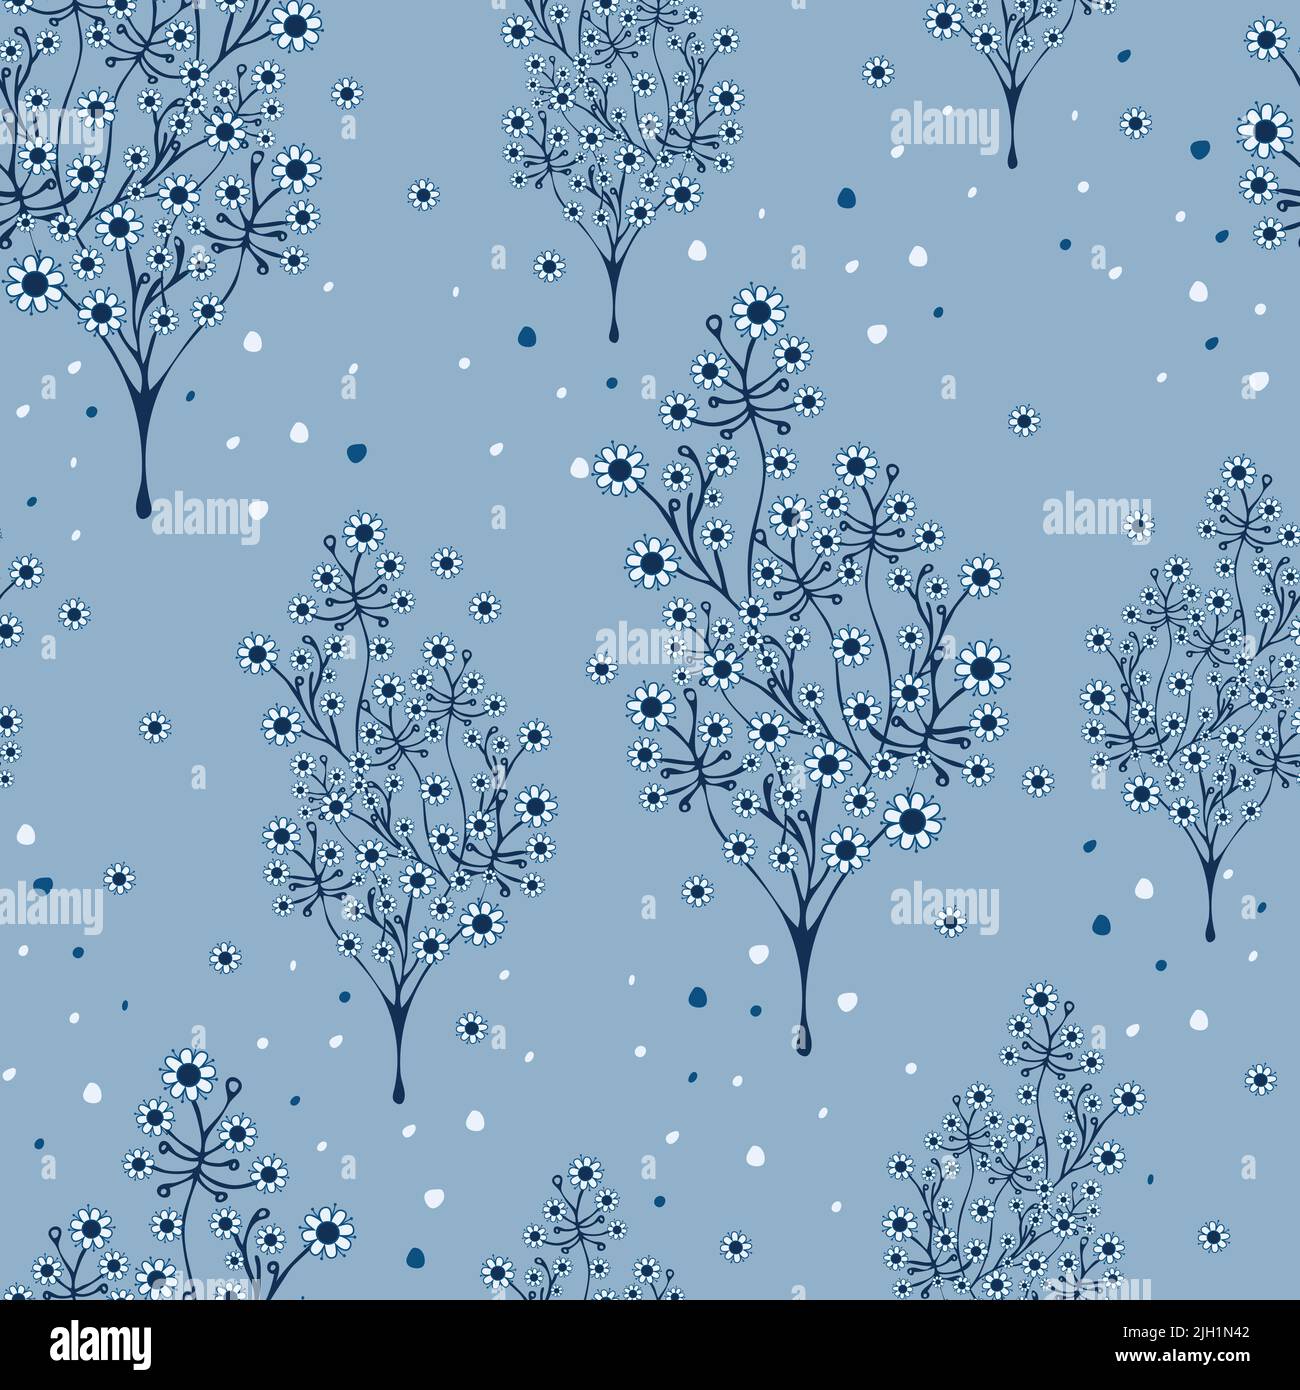 Seamless vector pattern with blooming blue trees. Beautiful forest background.  Winter wallpaper design. Stock Vector